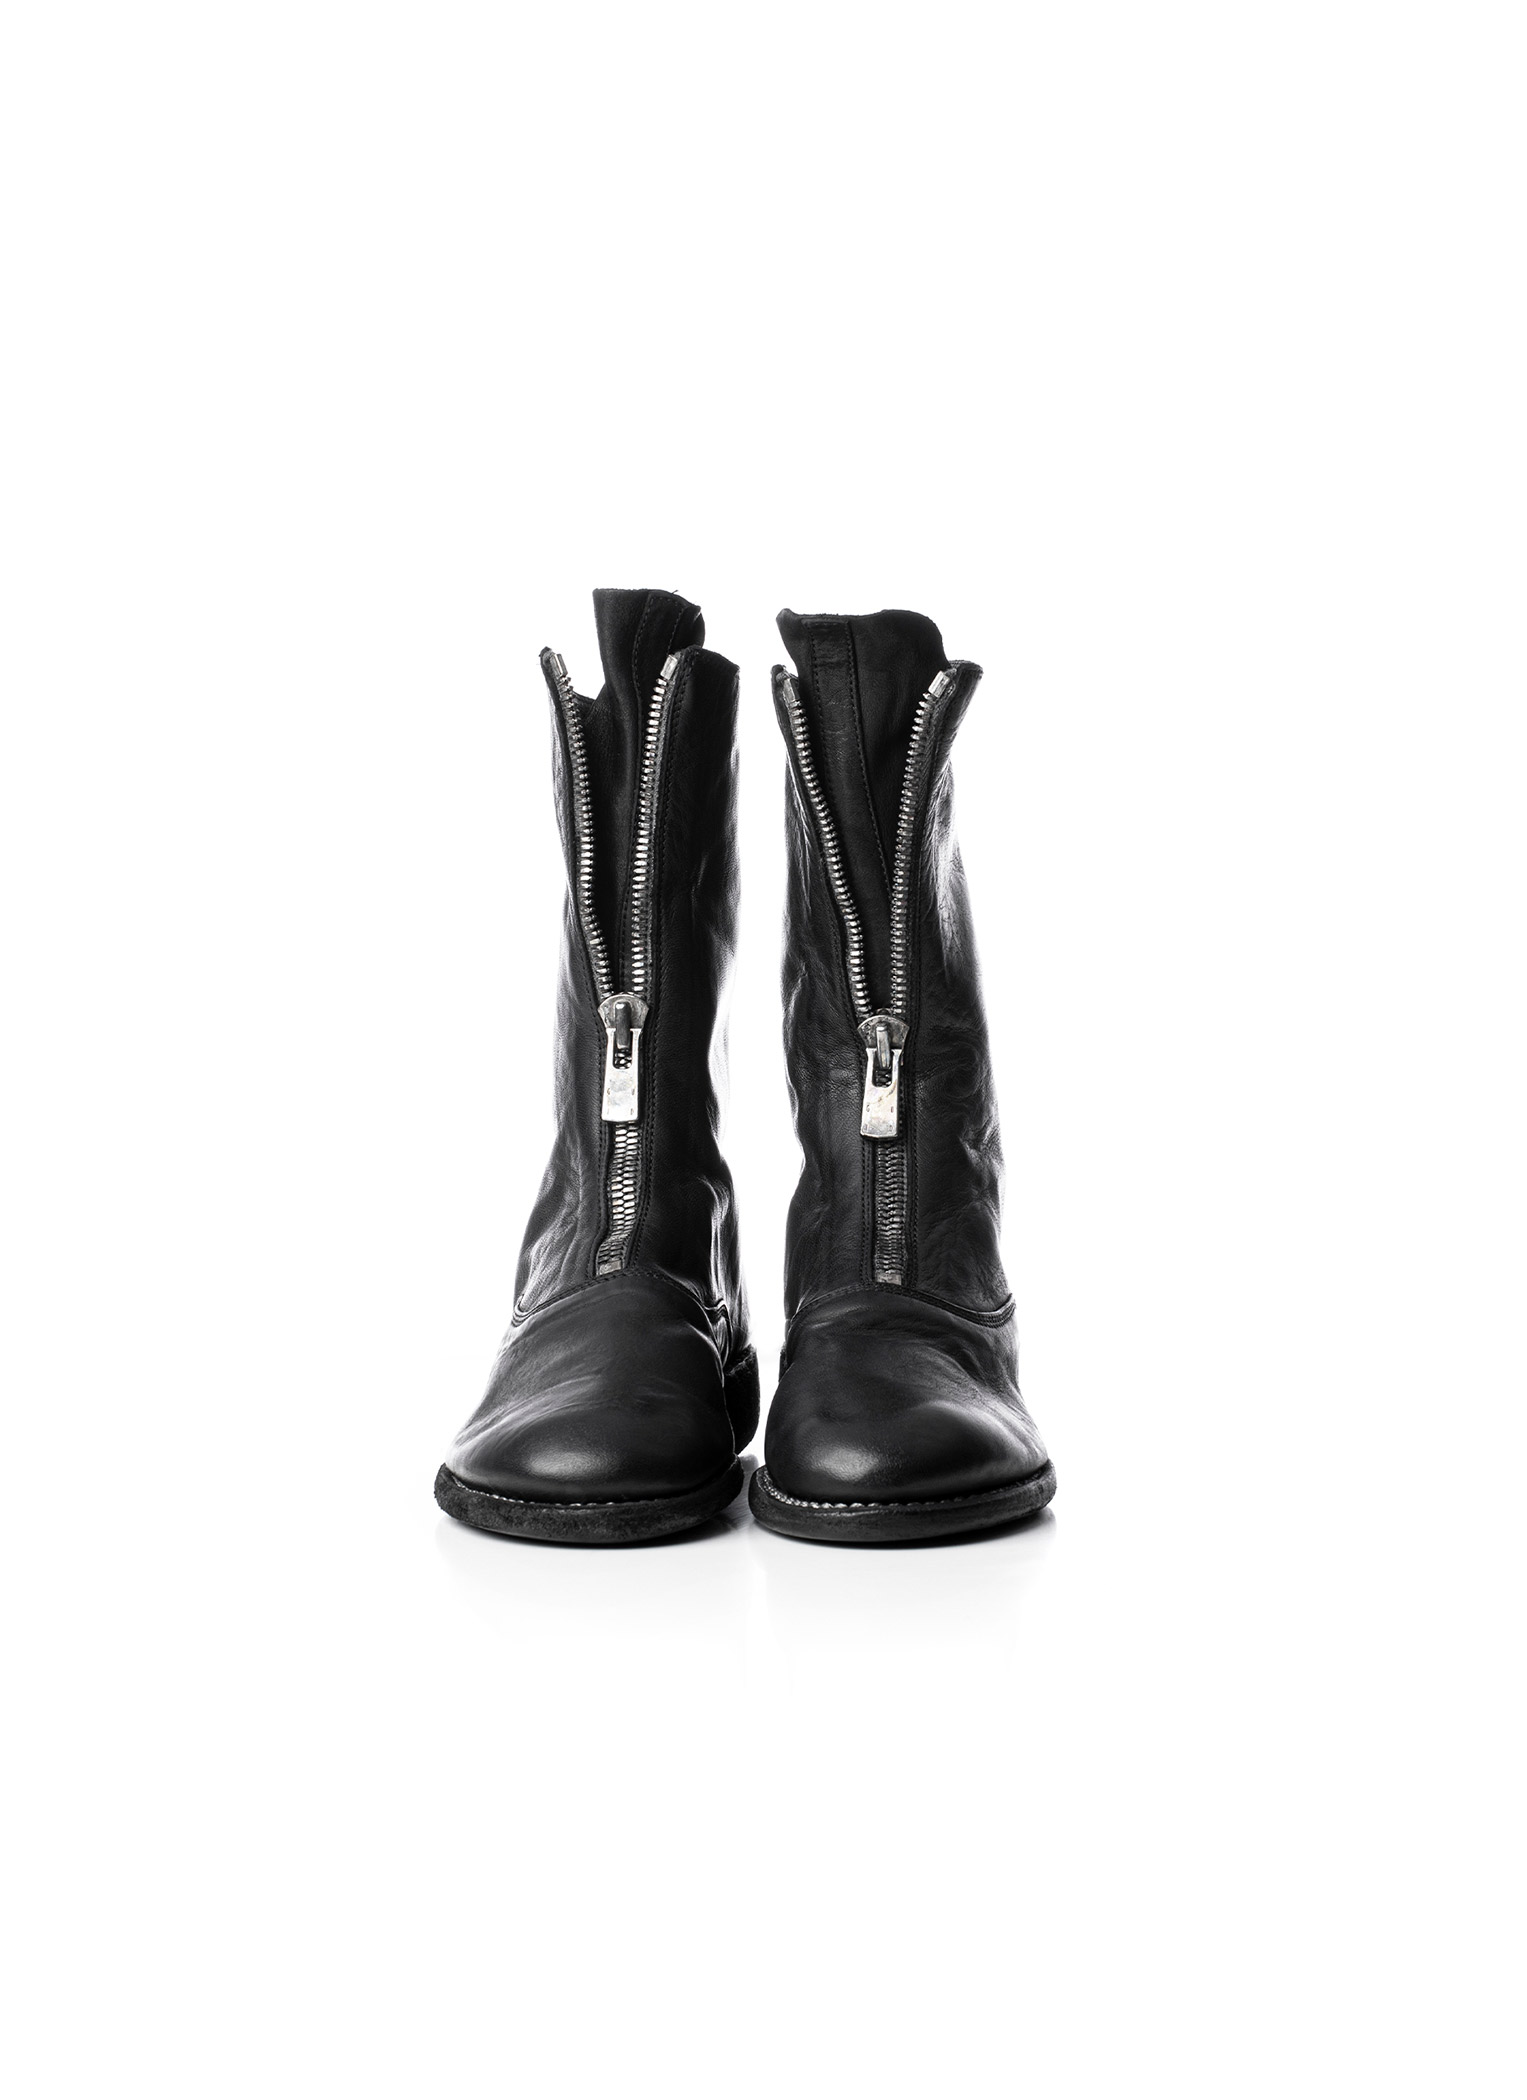 hide-m | GUIDI 310 Army Front Zip Boot Women, black horse leather